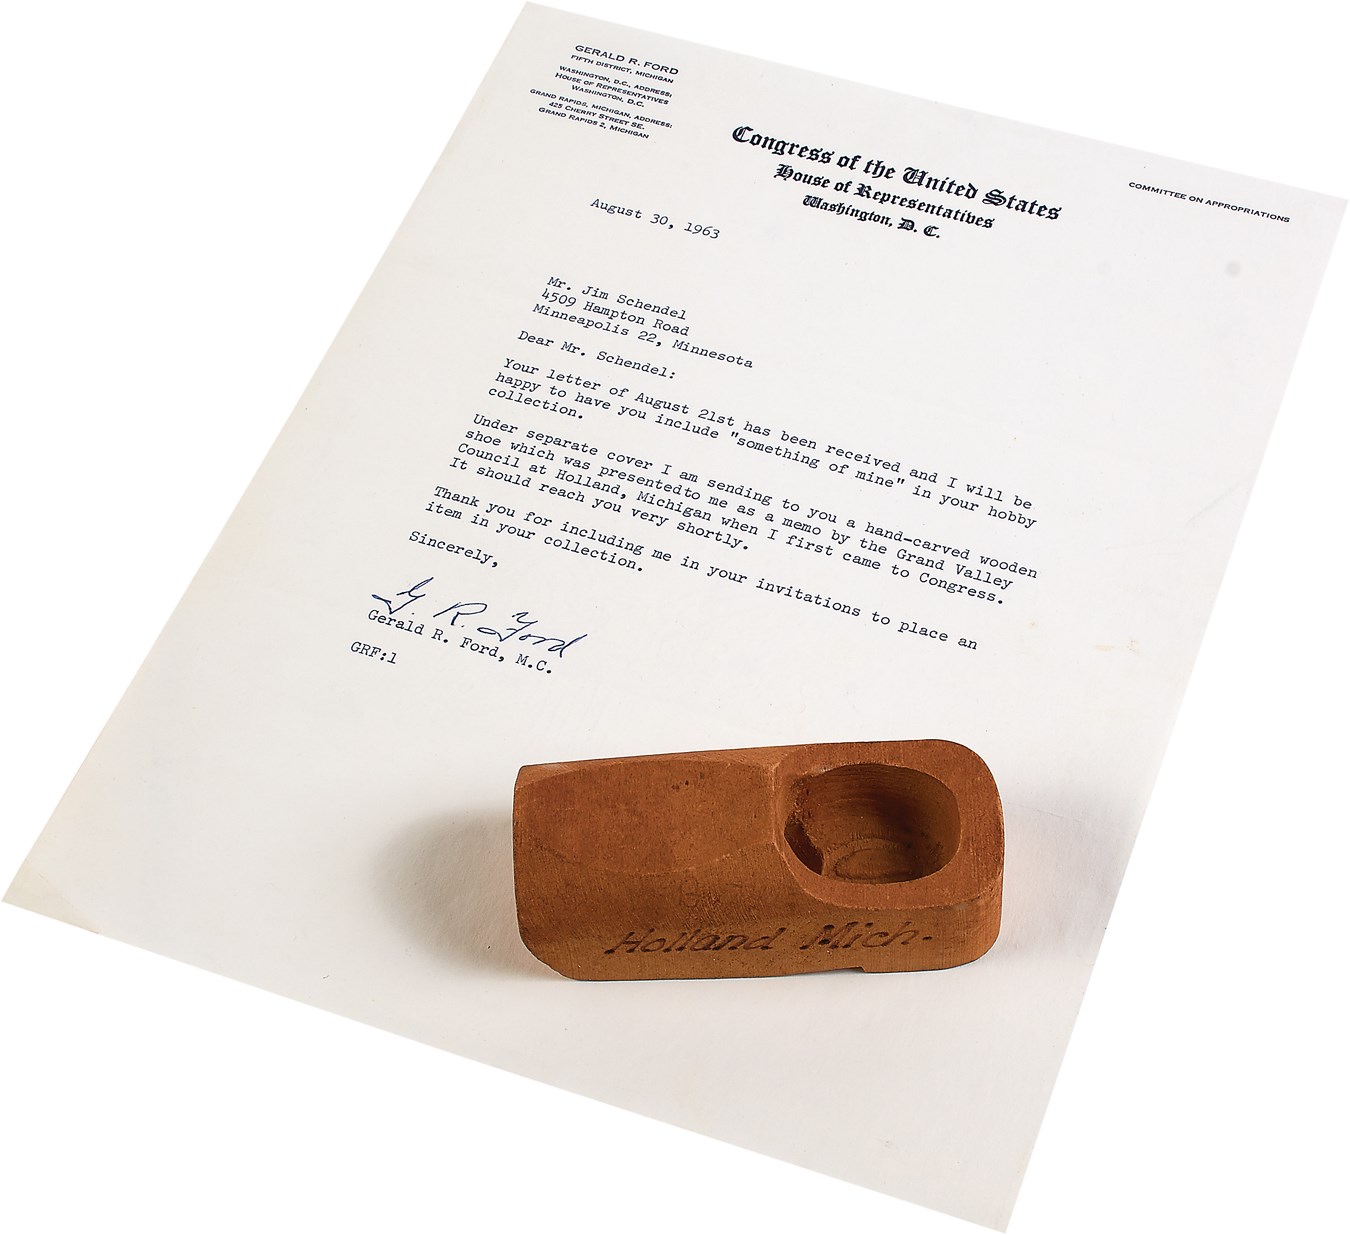 Jim Schendel Autograph Collection - Gerald Ford Personally Owned Wooden Shoe and Signed Letter Gifted by Ford